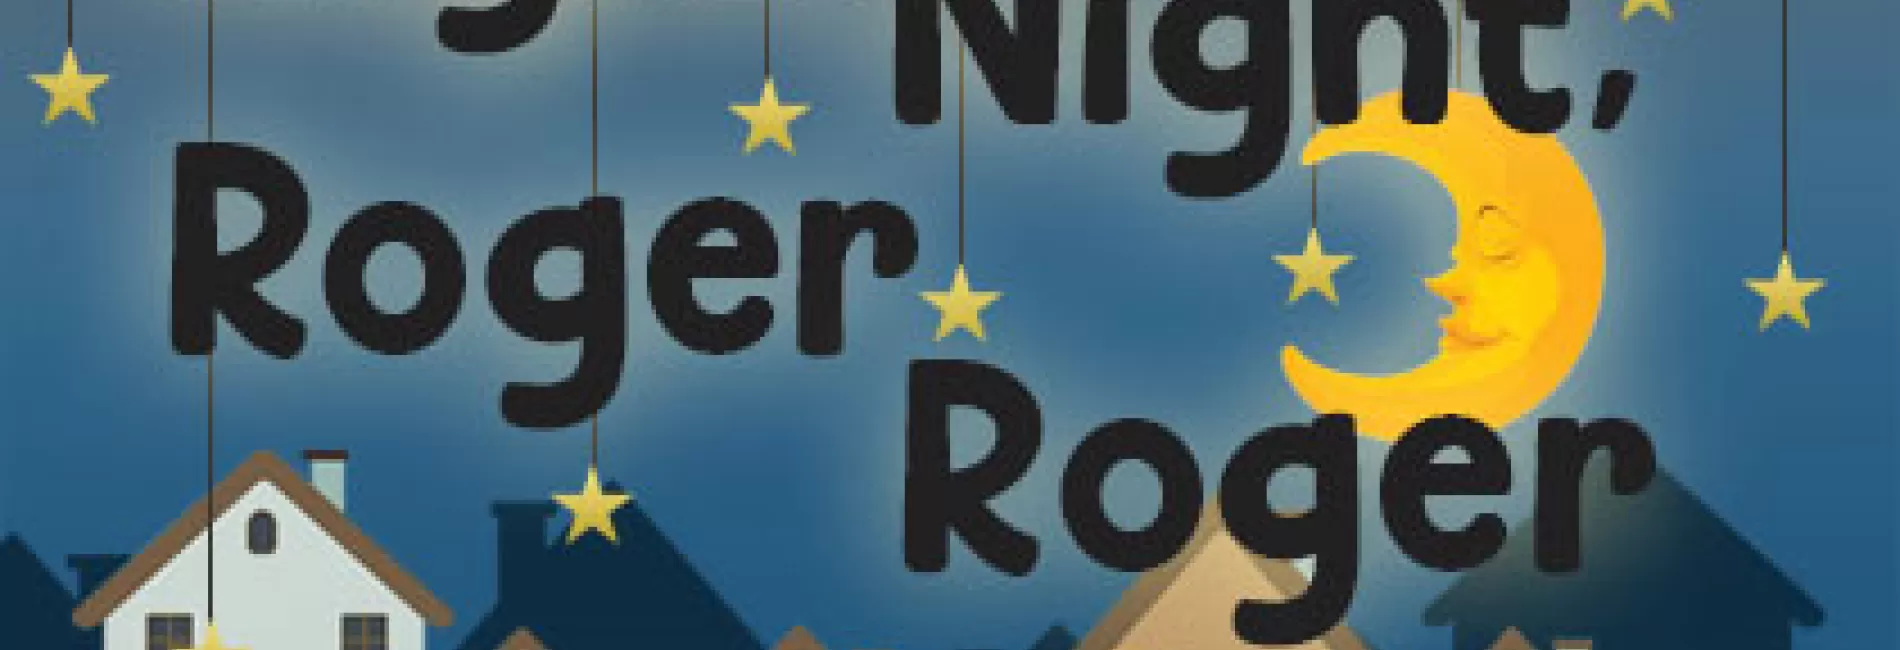 Drive-In: Night Night, Roger Roger: 7:30pm, Sat 11/21/20